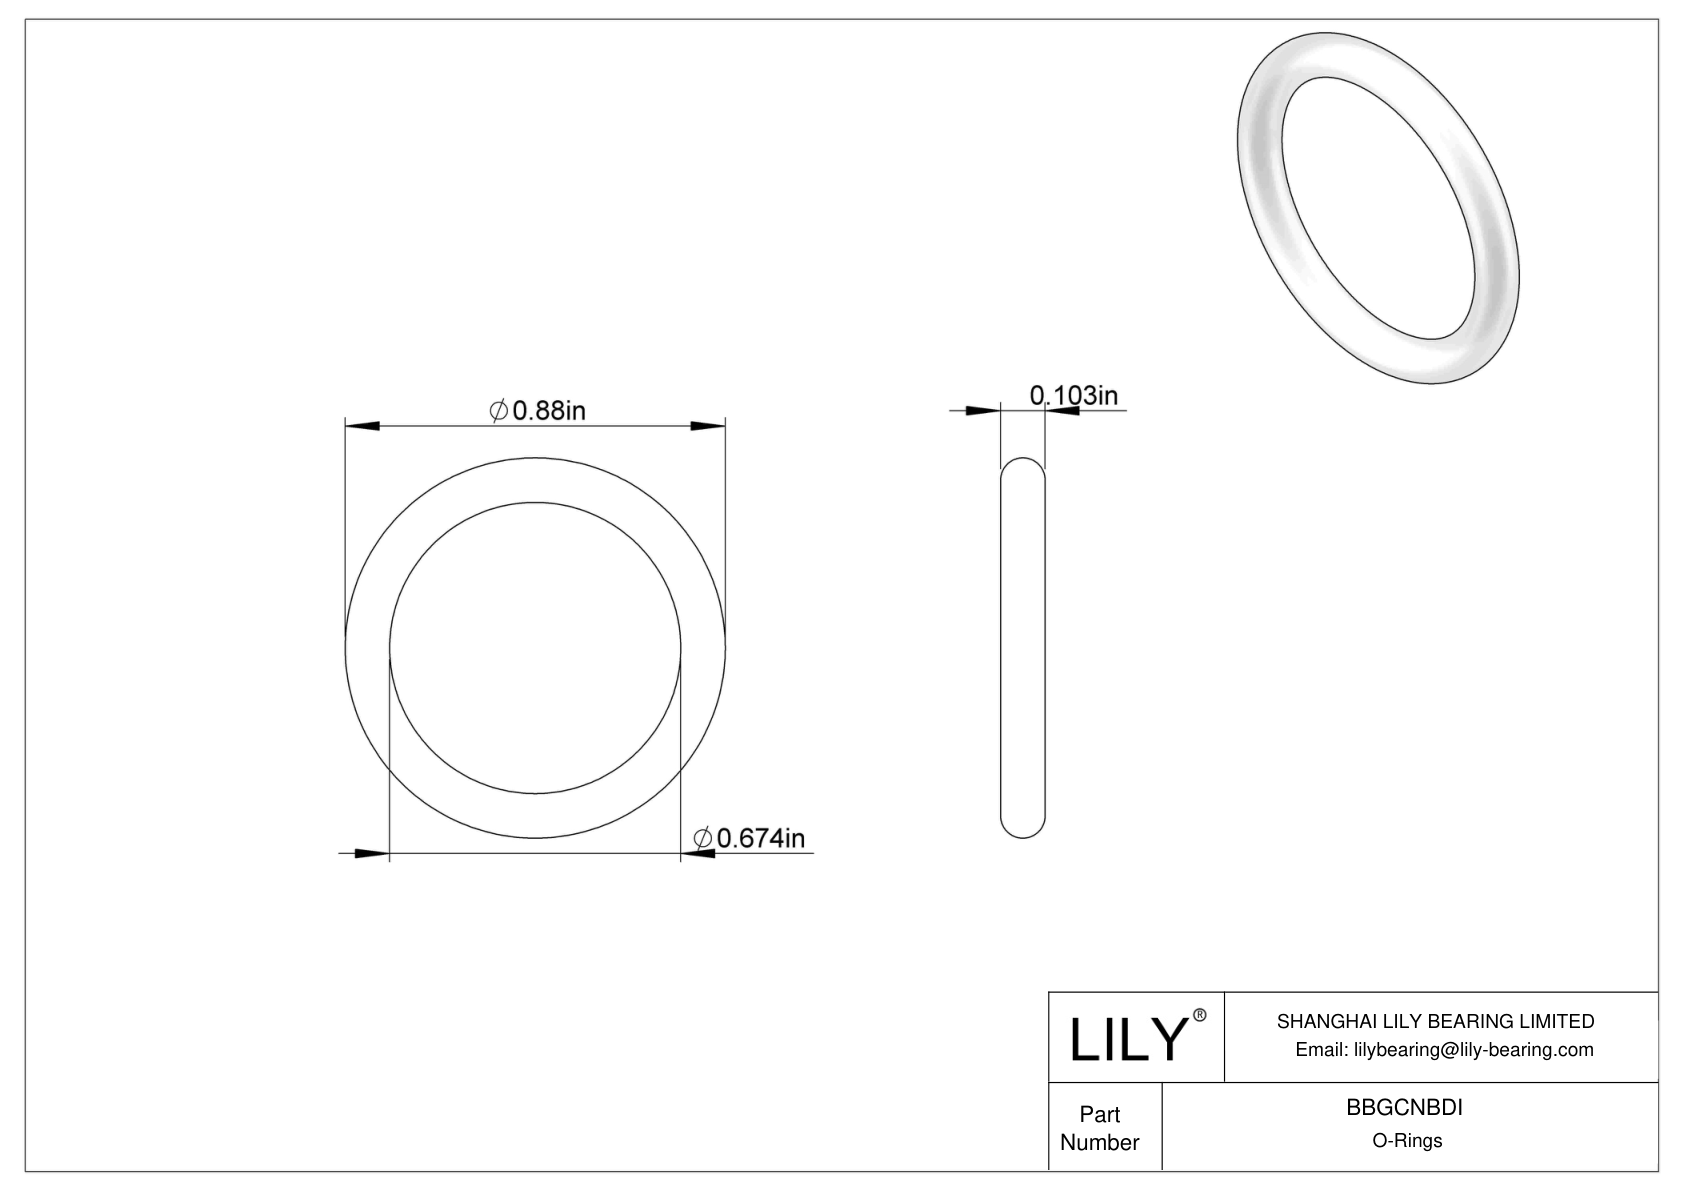 BBGCNBDI High Temperature O-Rings Round cad drawing